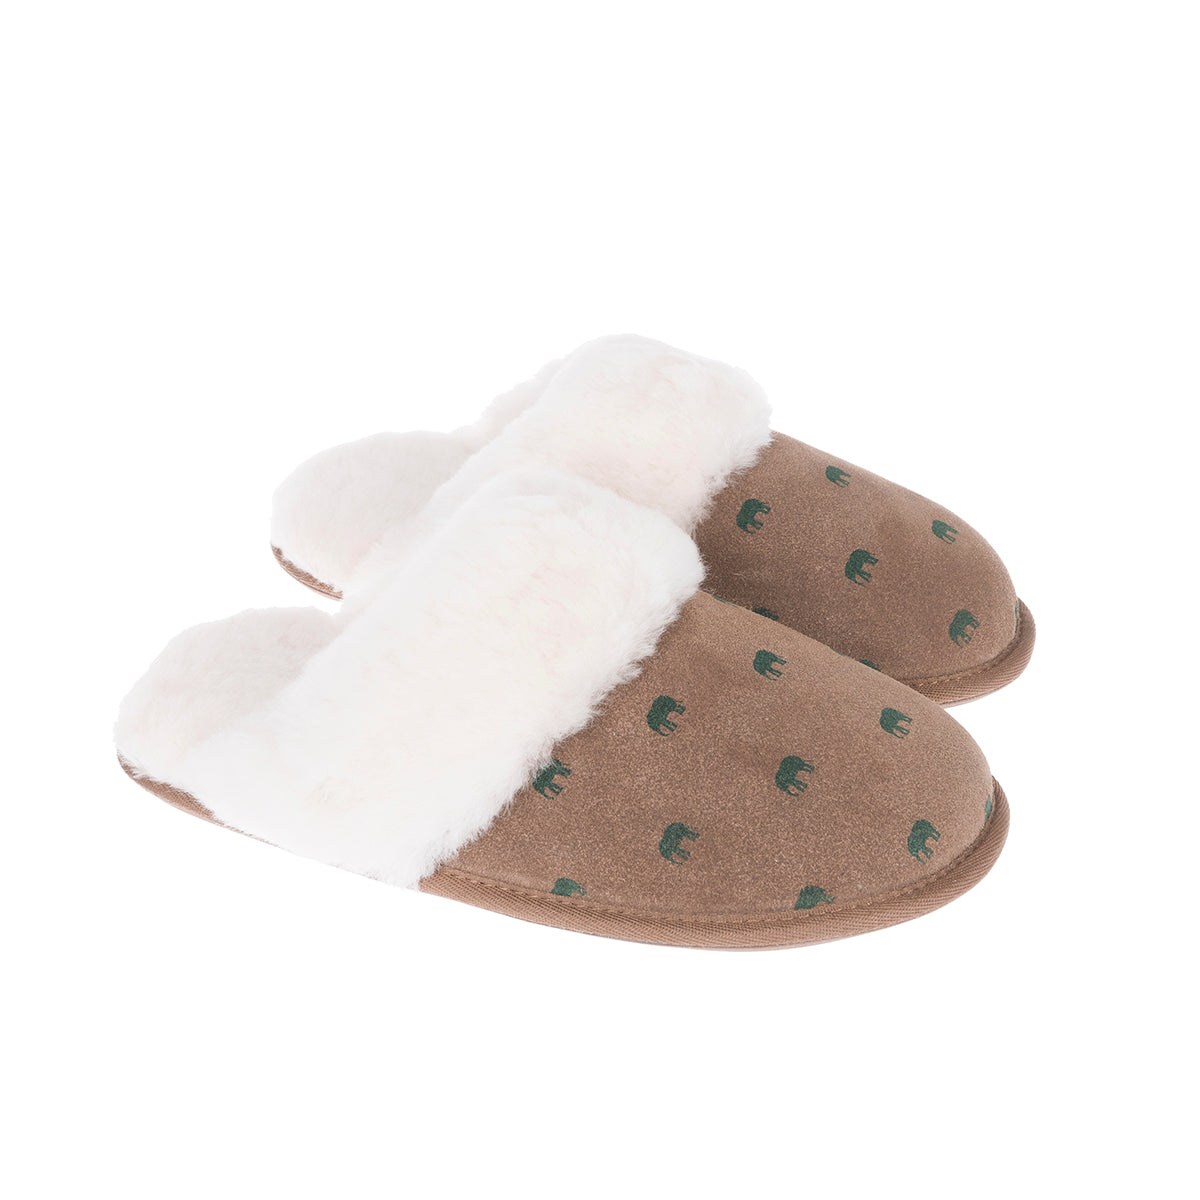 Elephant Slippers by Sophie Allport